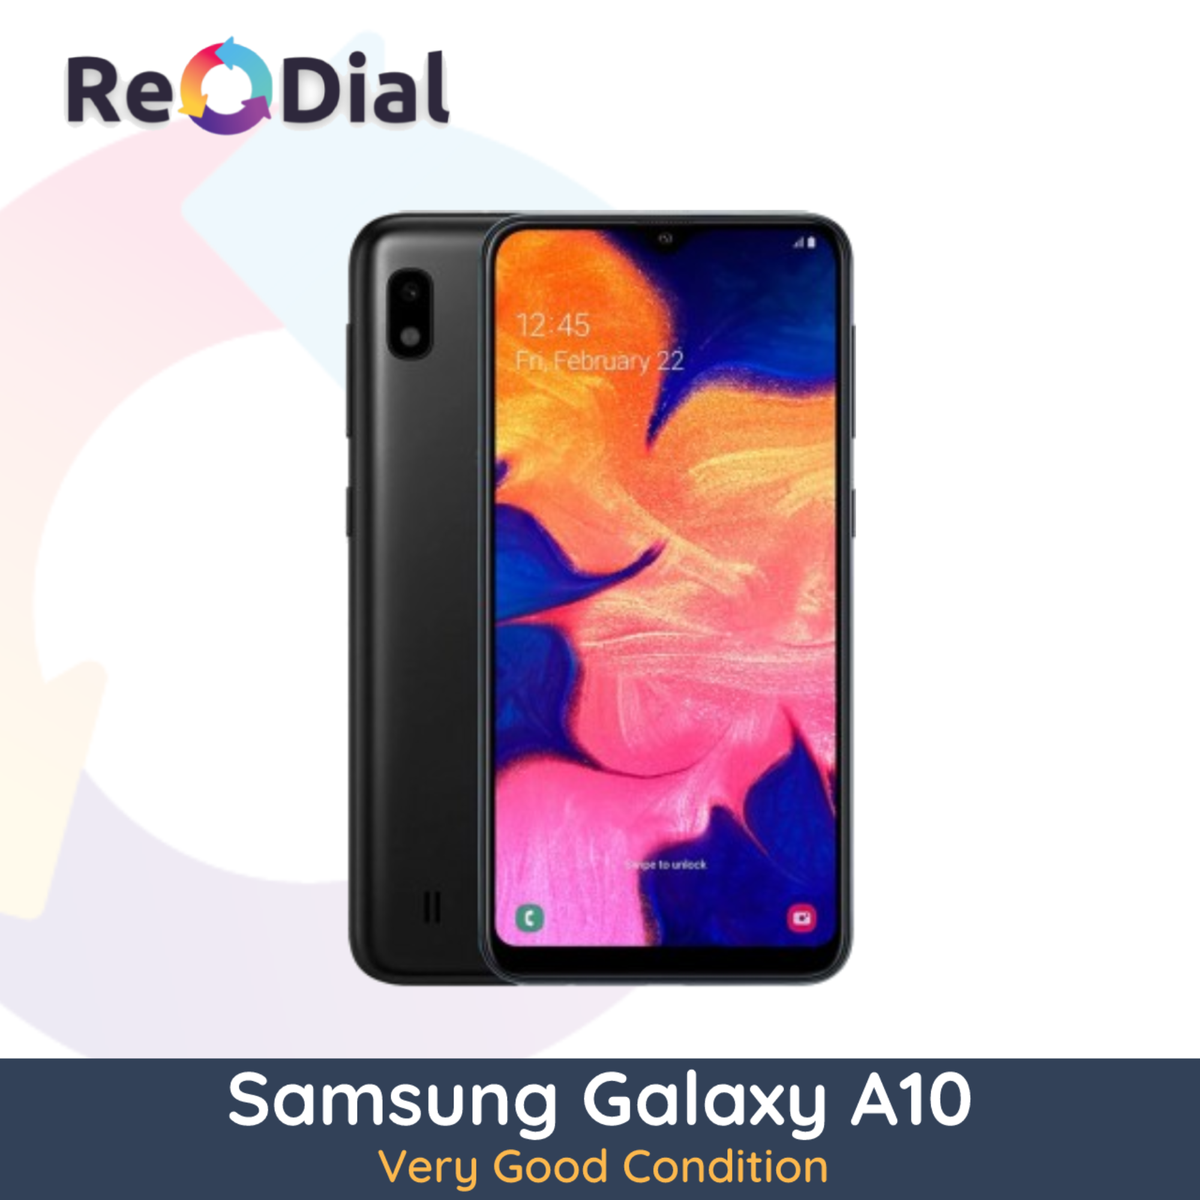 Samsung Galaxy A10 (A105G/DS) - Very Good Condition